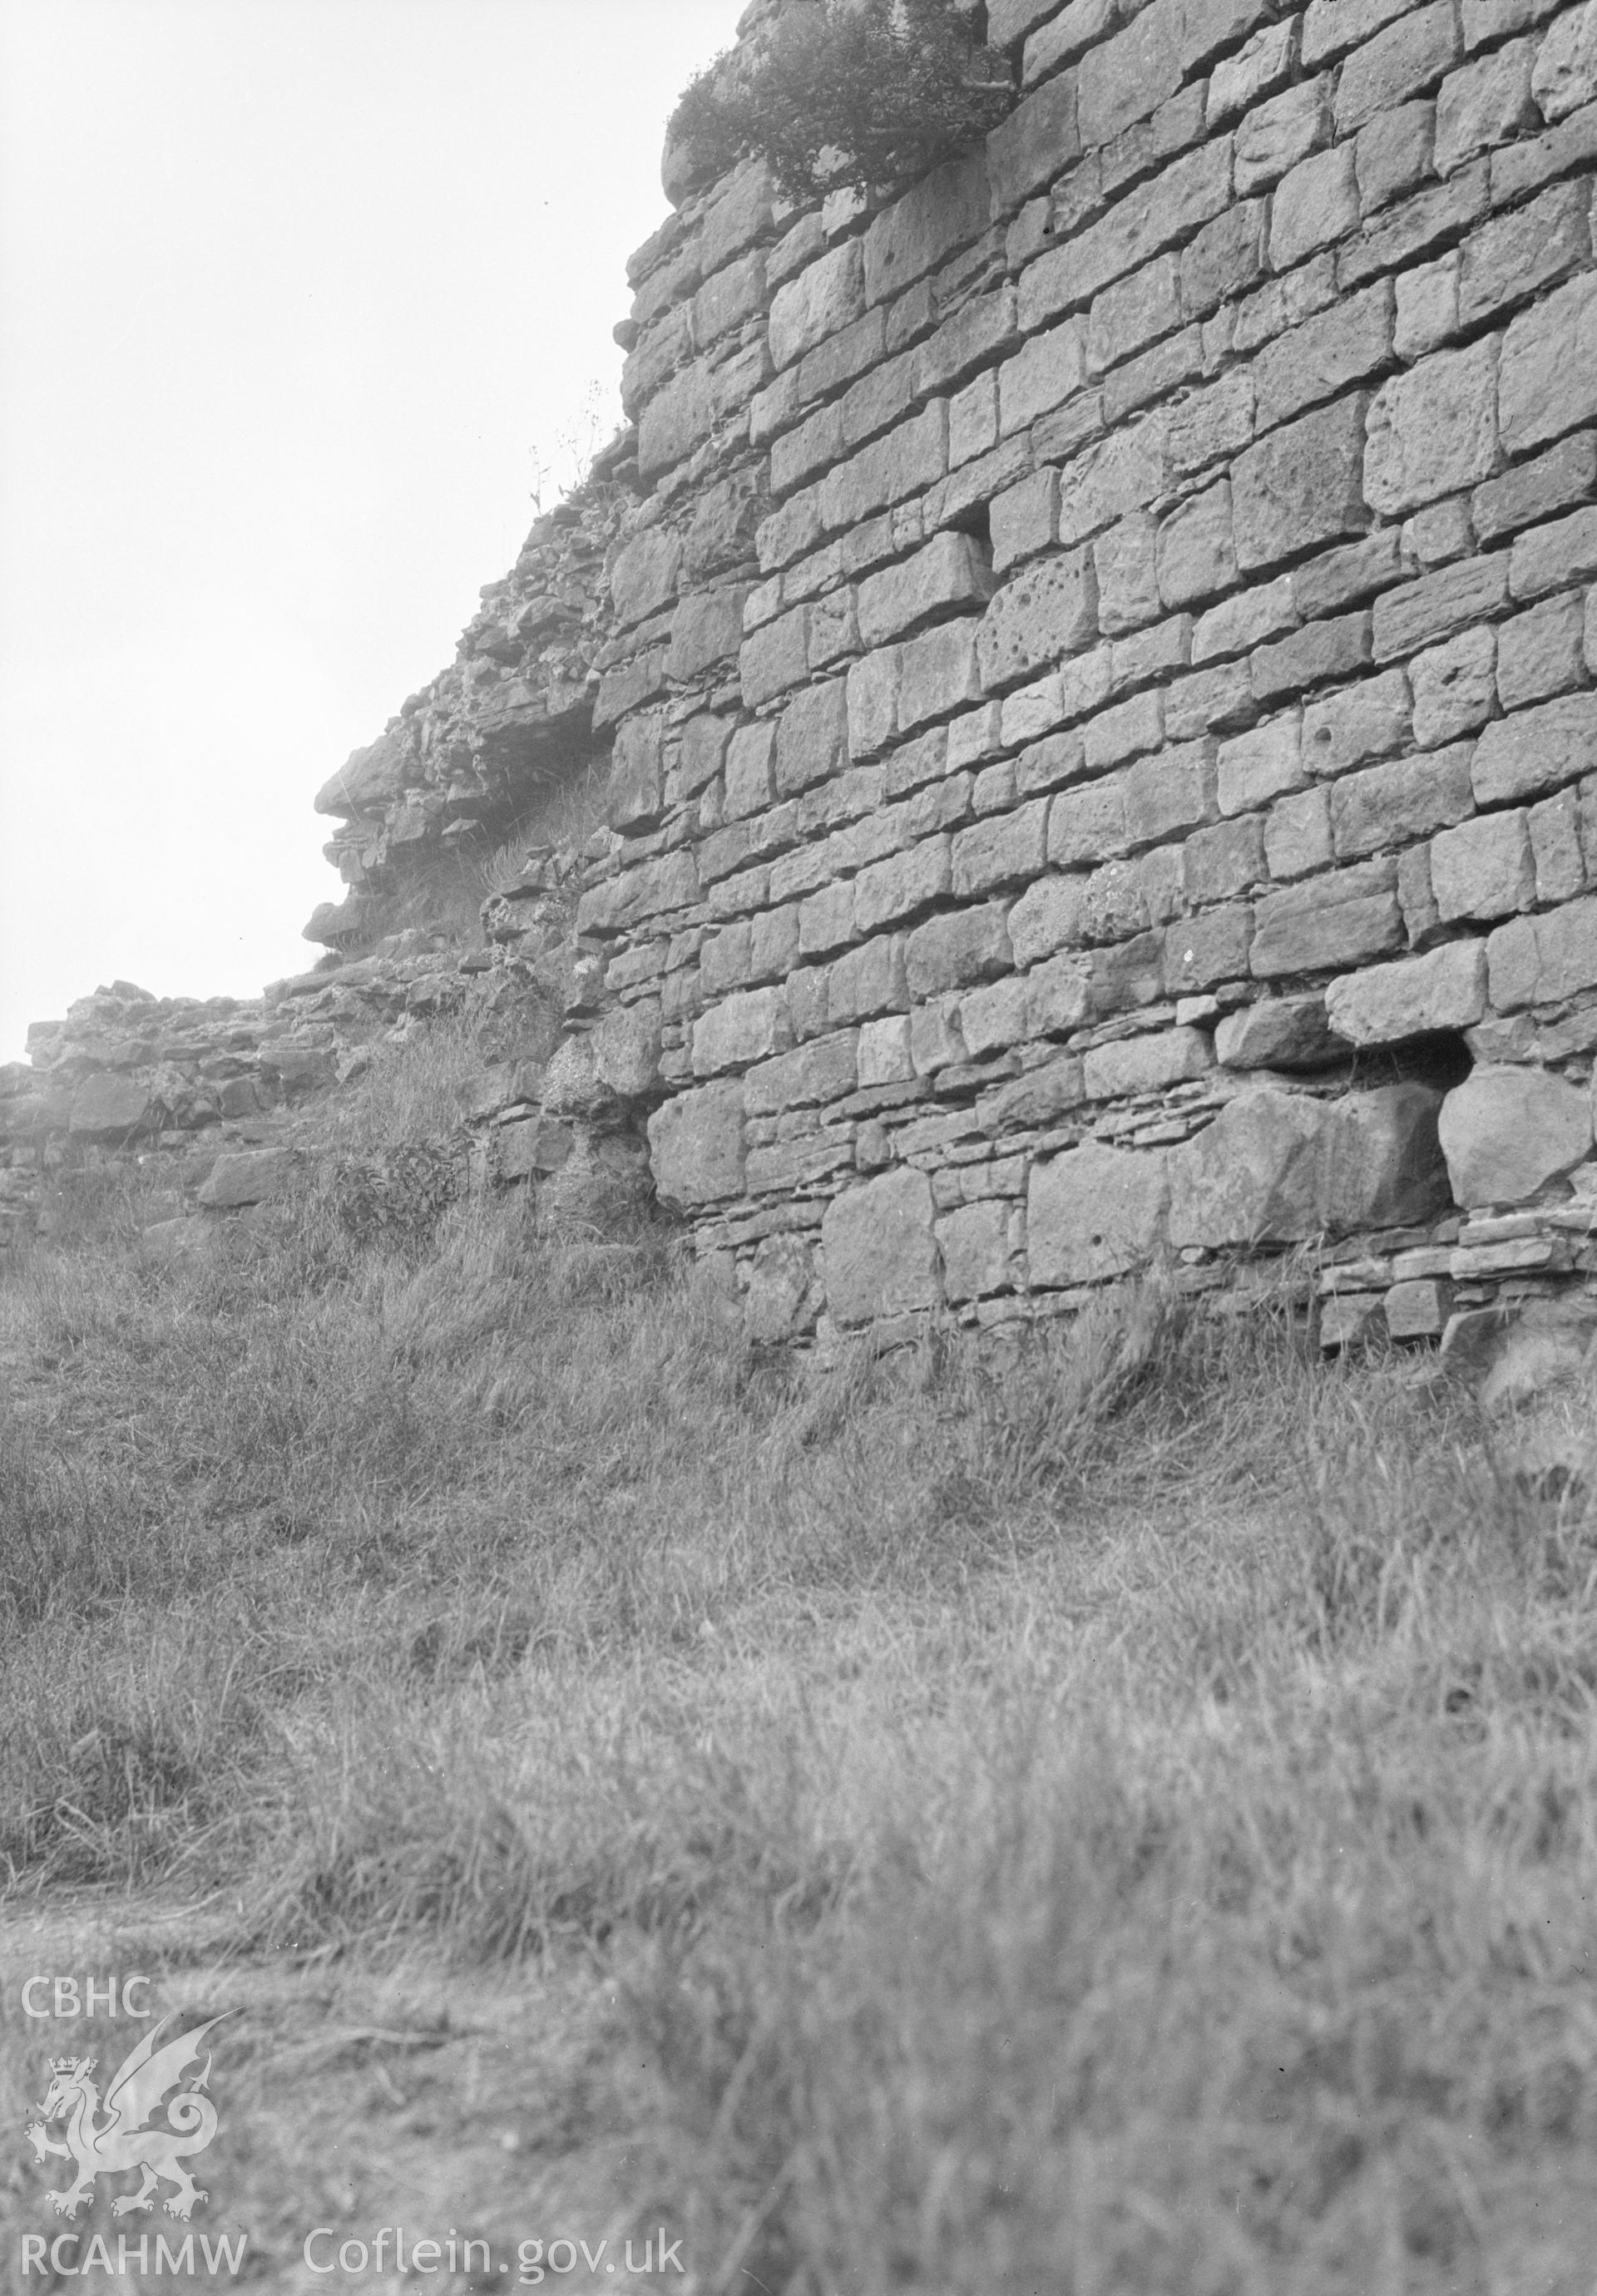 Digital copy of a nitrate negative showing detailed view of Caergwrle Castle. From the Cadw Monuments in Care Collection.